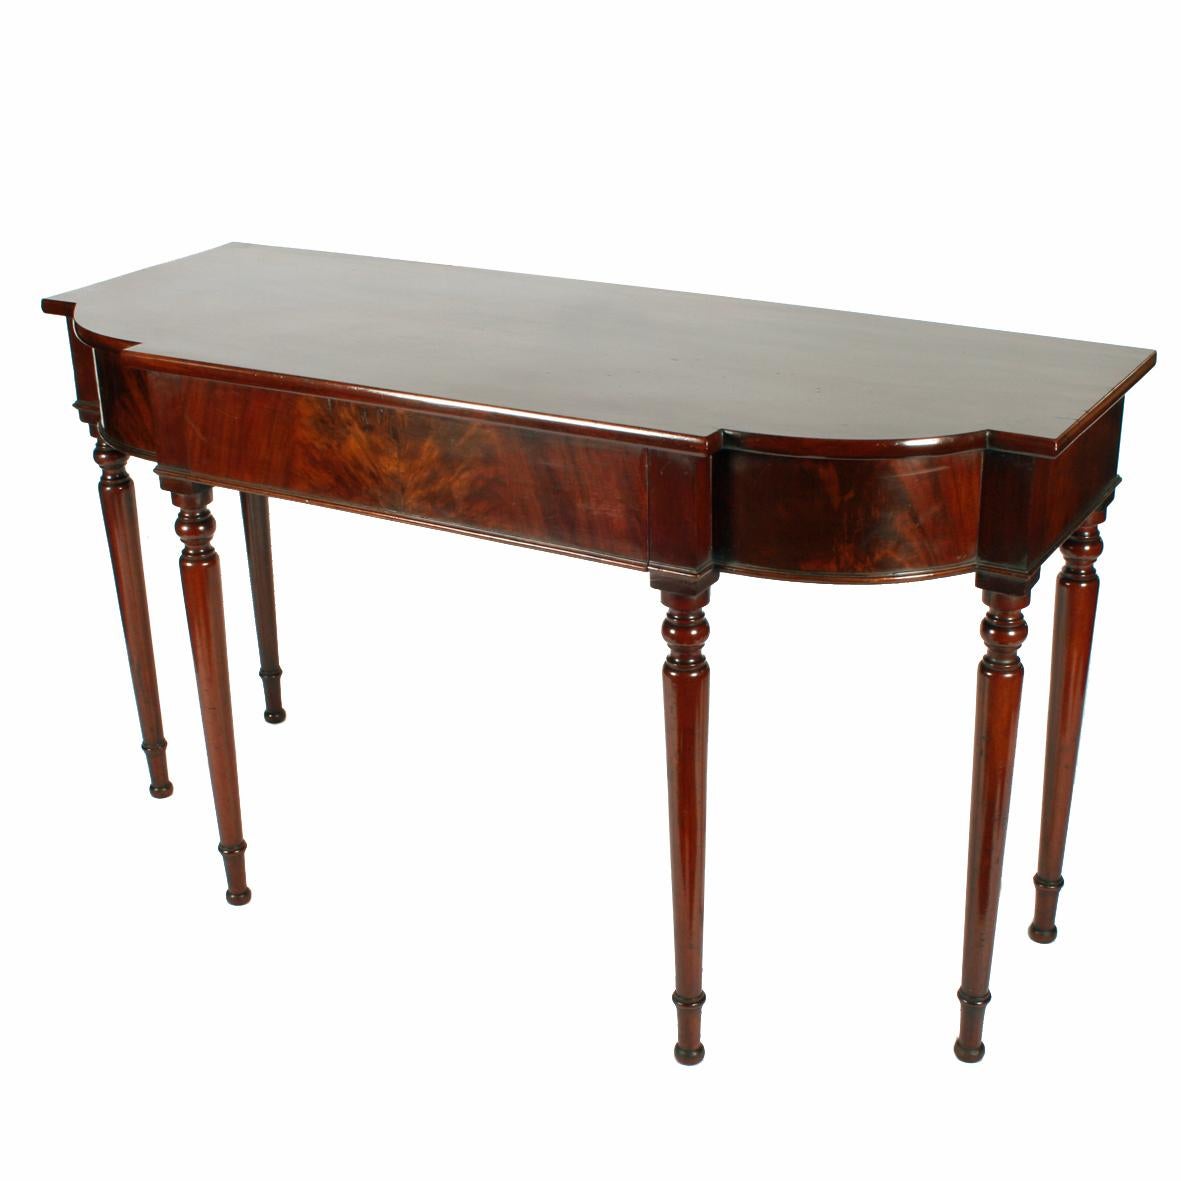 Georgian Mahogany serving table.


A Georgian mahogany side or serving table.

The table stands on six turned legs and has a shaped one-piece top.

The table has a large concealed central drawer with a hand grip underneath and is oak and pine